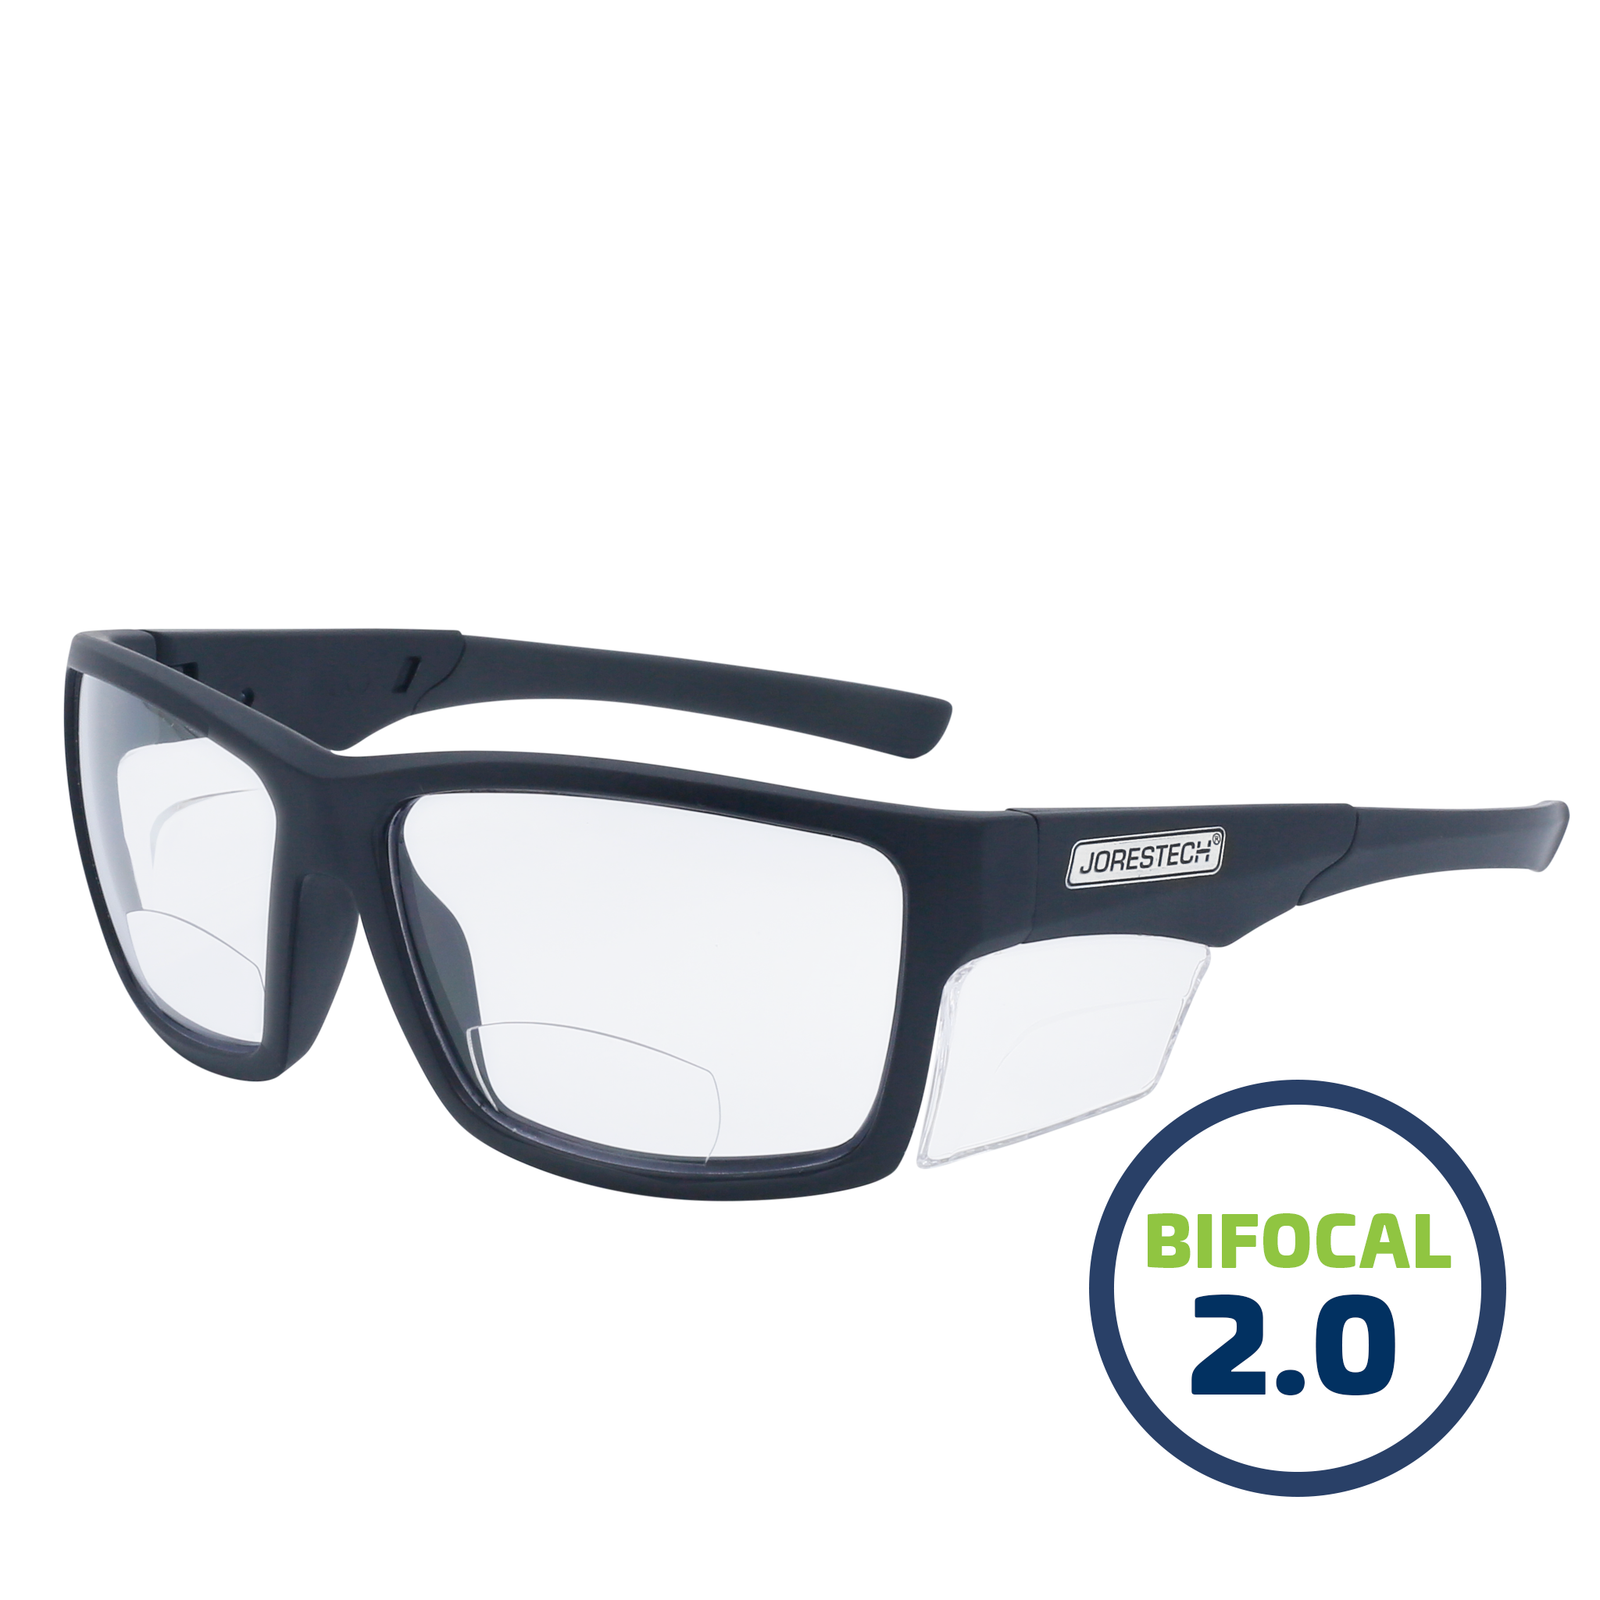 A side view of a bifocal safety reader JORESTECH Glasses with clear side shield for high impact protection. These safety glasses have black frame and clear polycarbonate lenses. In a green and blue drawing it reads bifocal 2.0 over white background